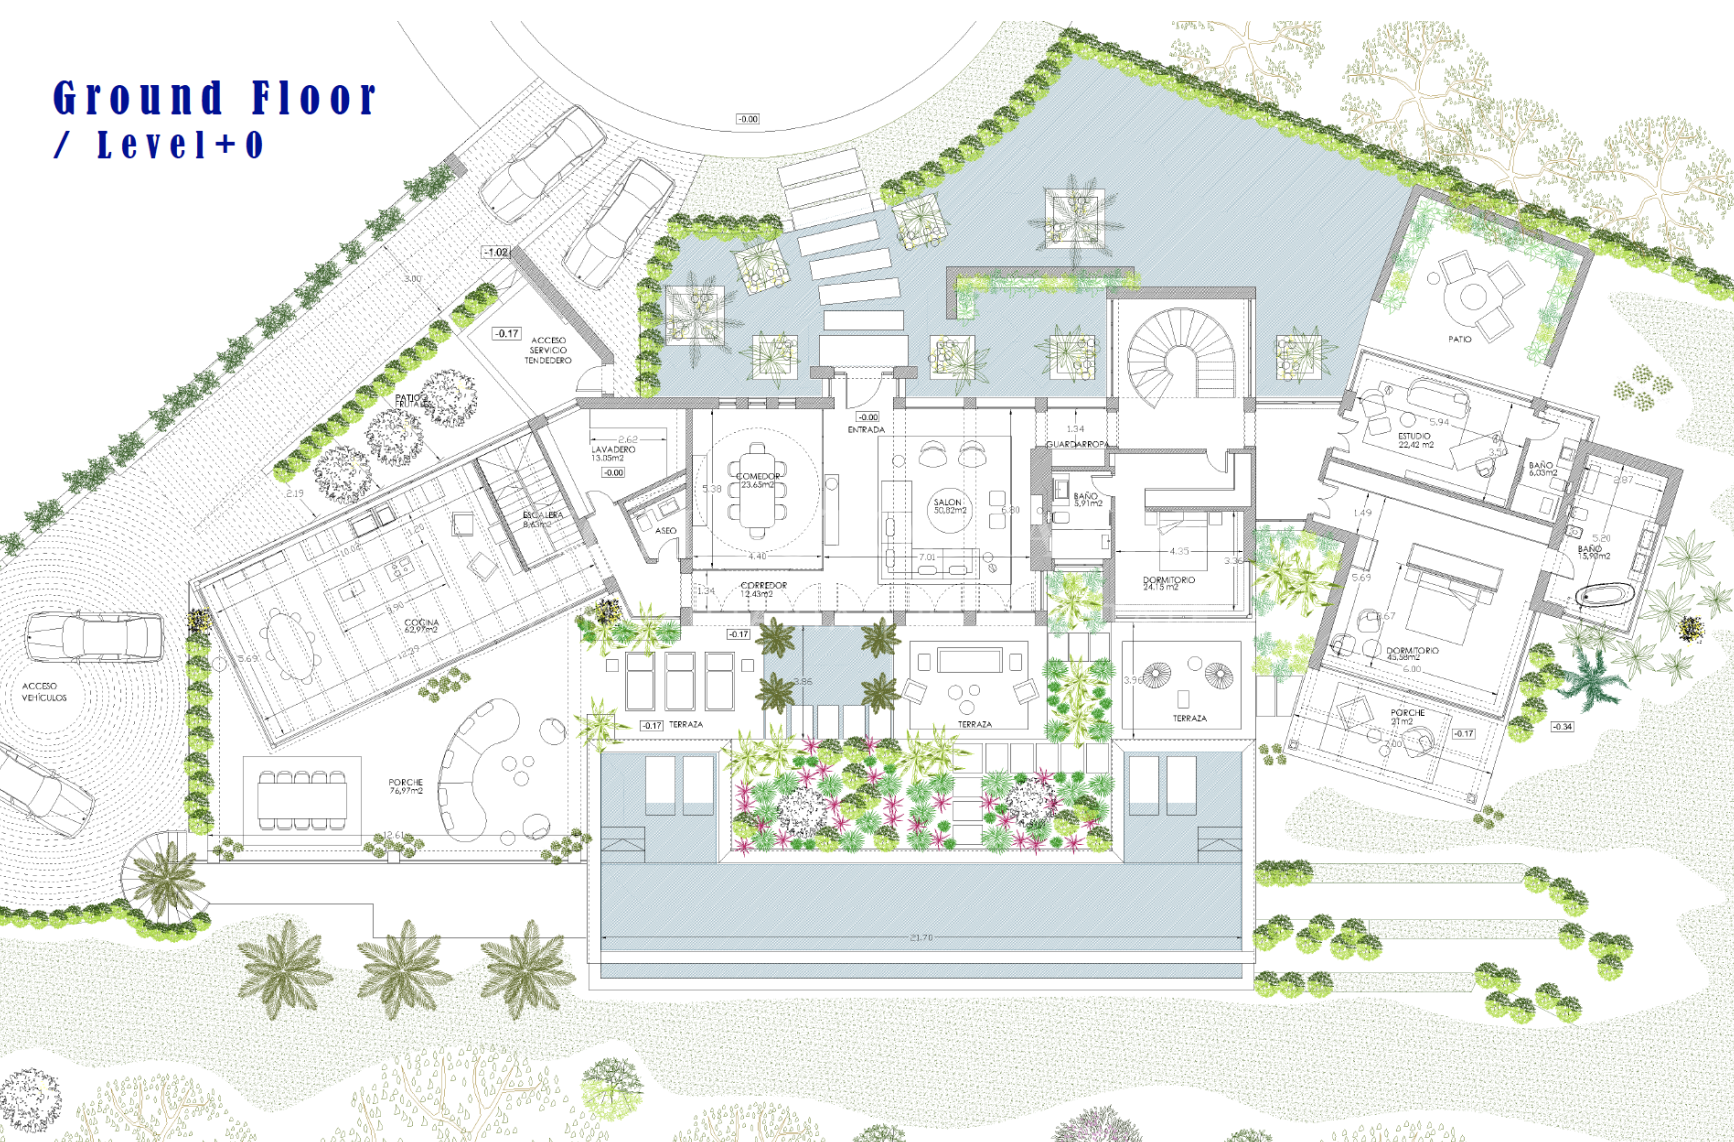 CASA del AGUA… a new and original project about to be built in Sotogrande